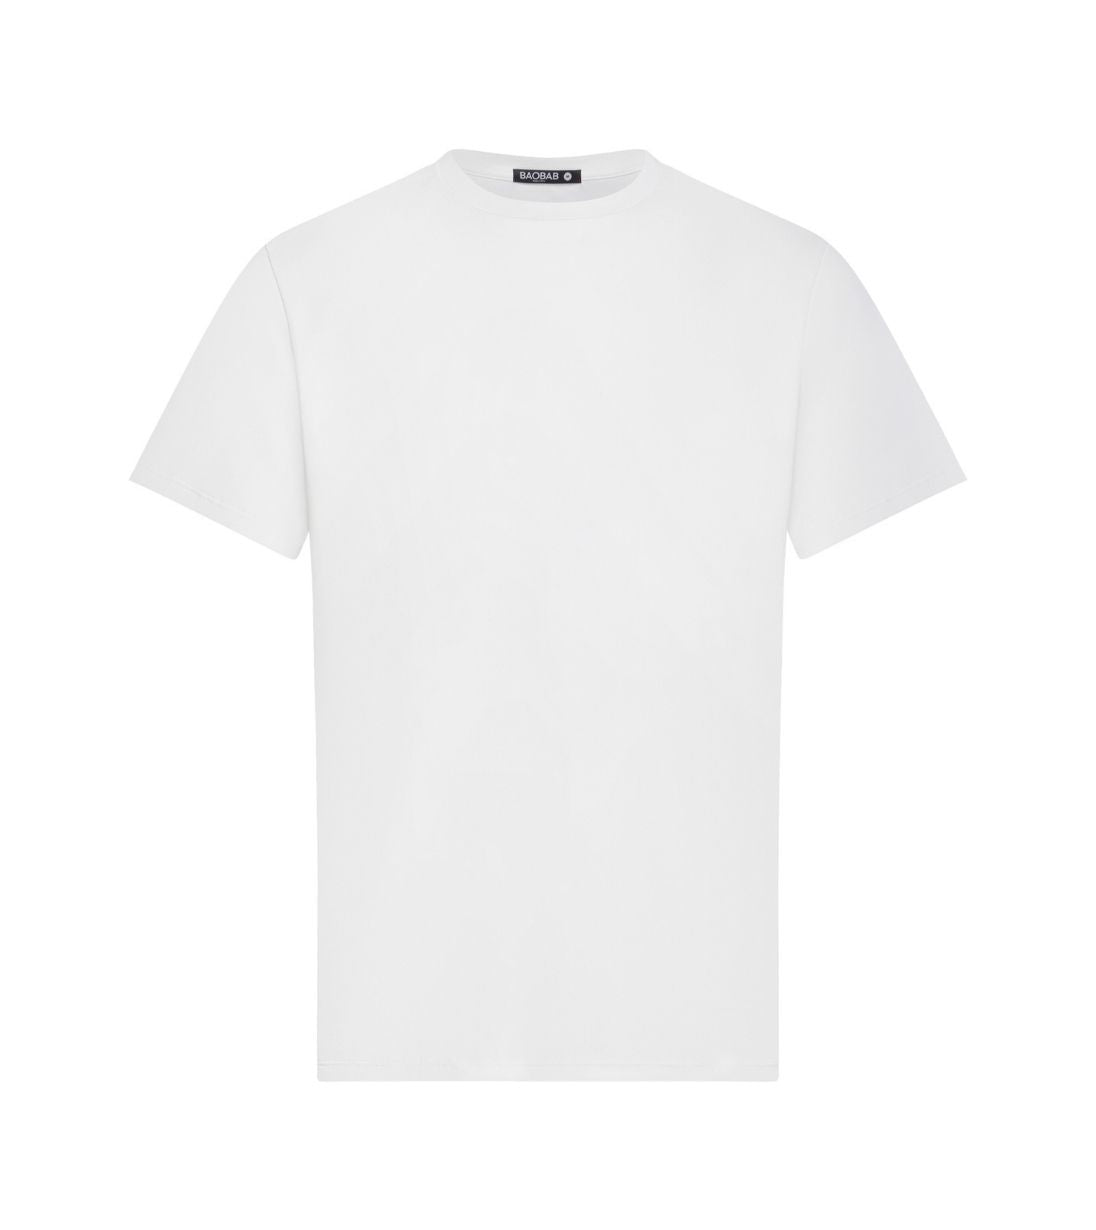 The Perfect Tee - Short Sleeve